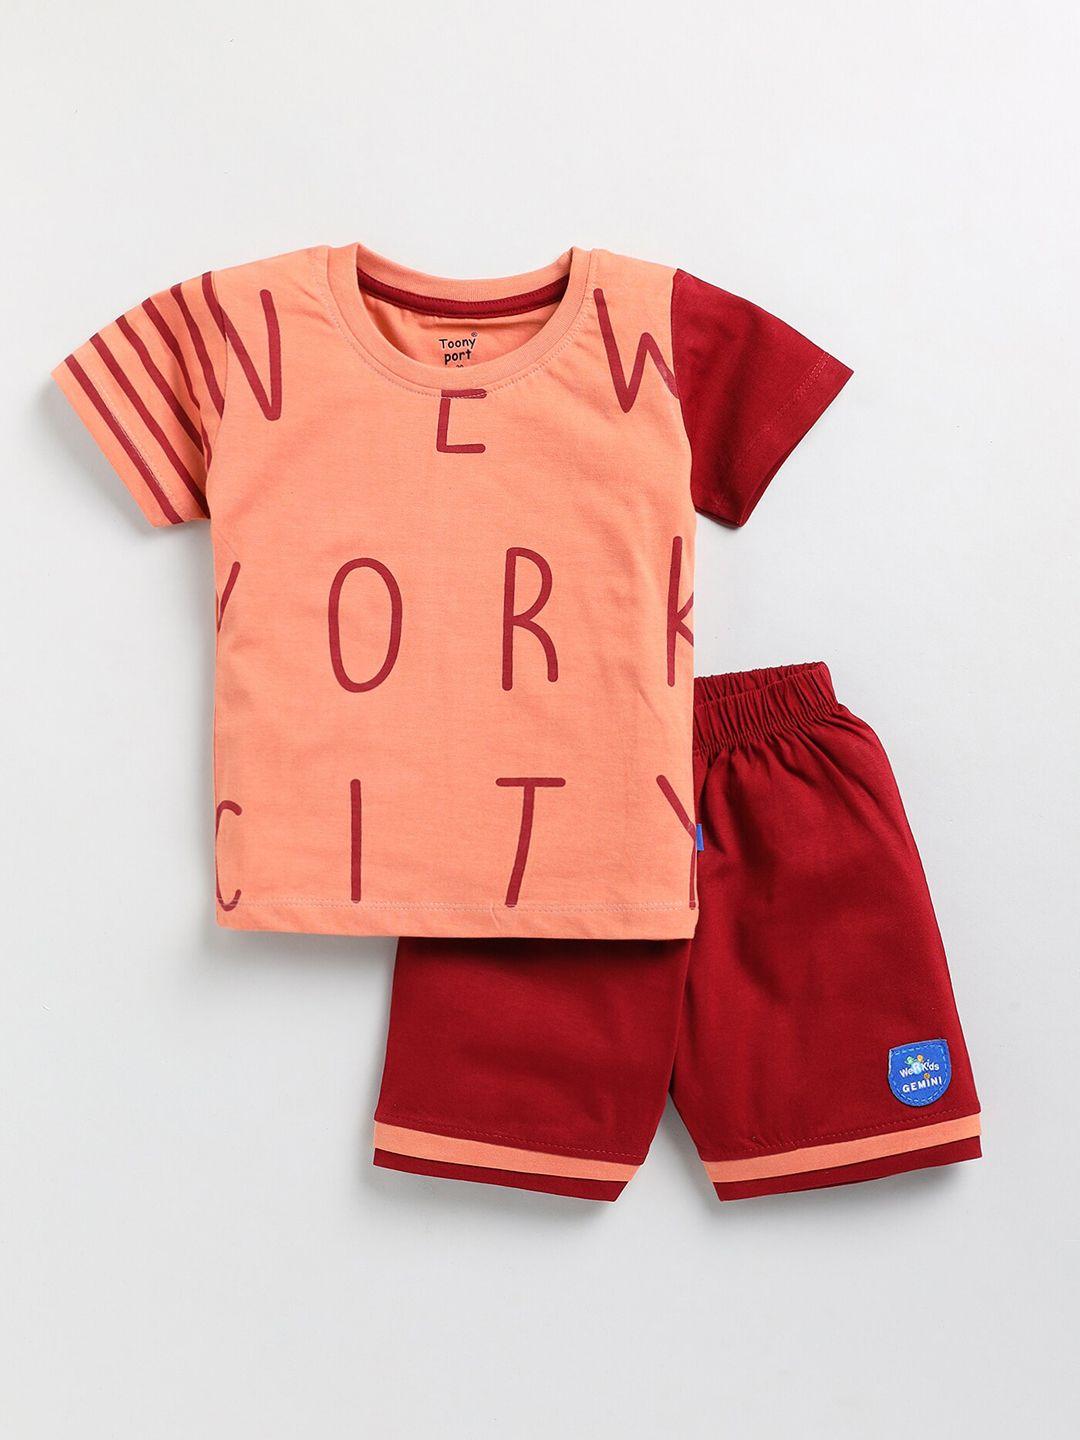 toonyport-boys-printed-cotton-t-shirt-with-shorts